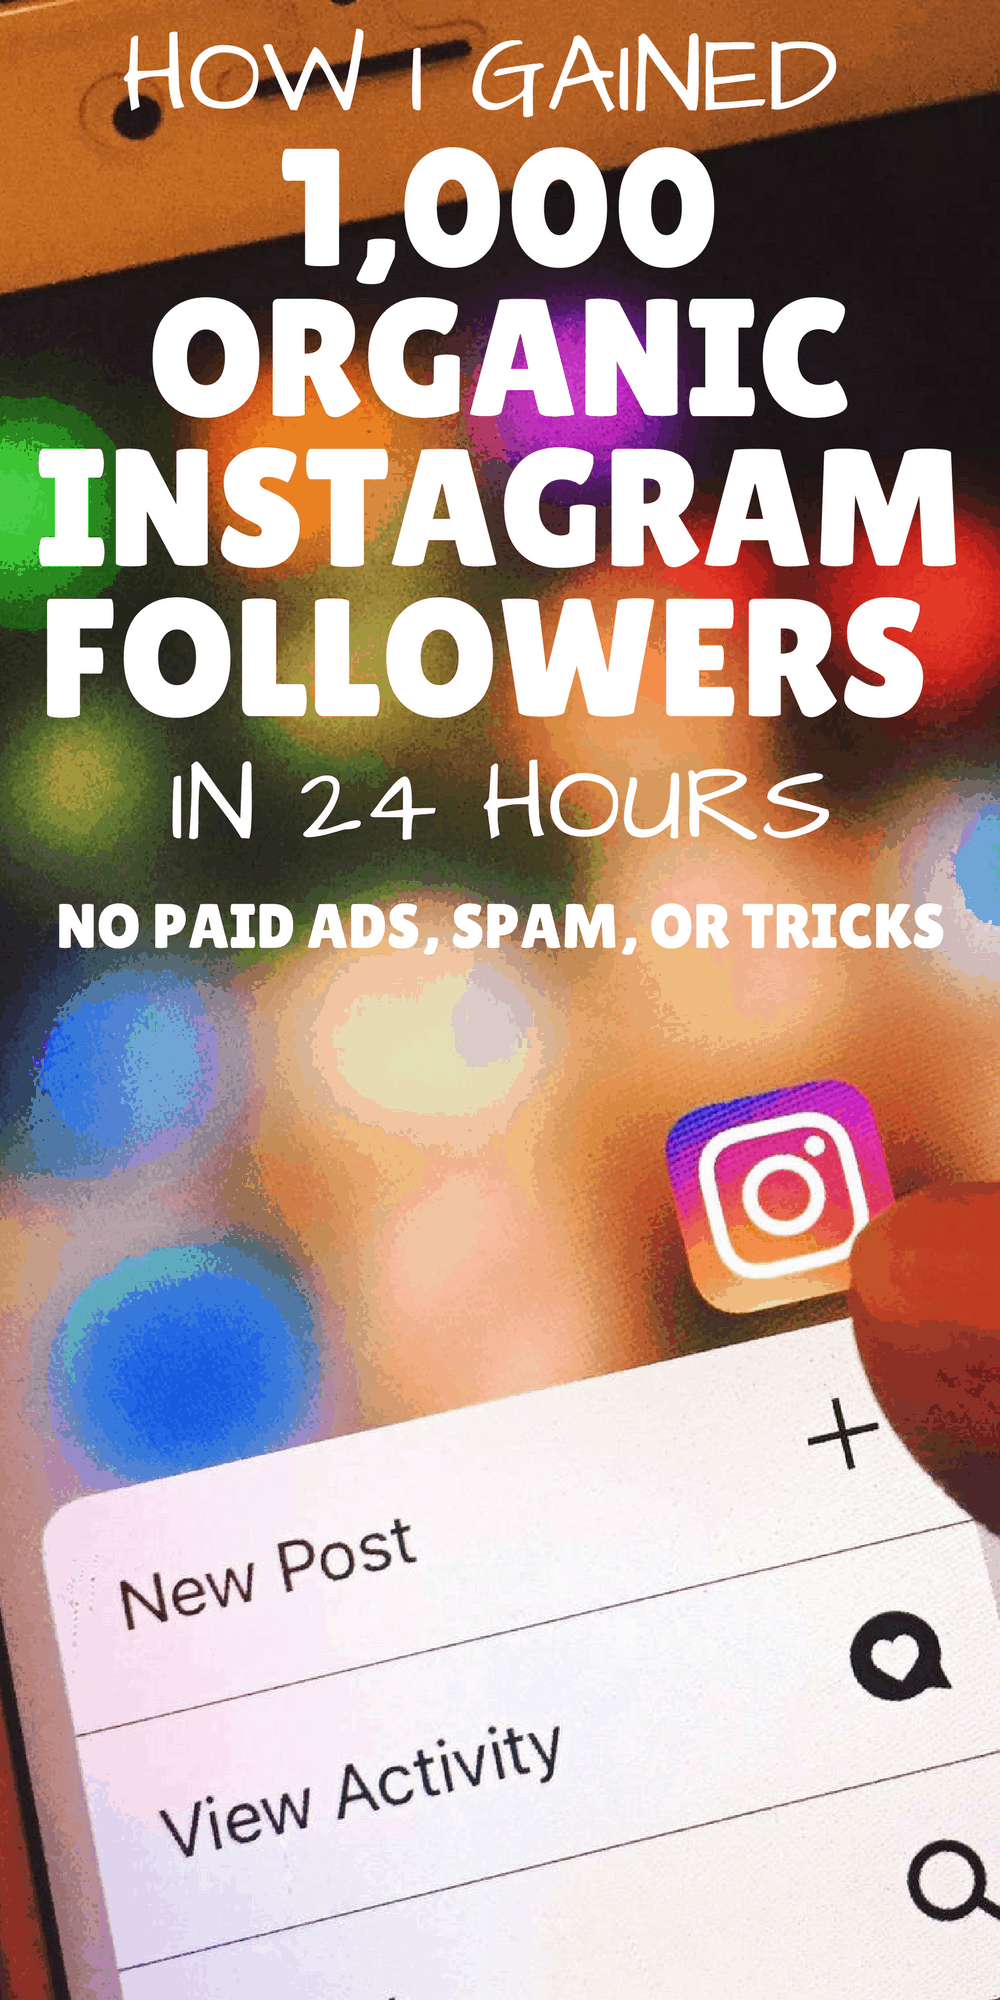 how I gained 1,000 instagram followers in 24 hours - Mason ... - 1000 x 2000 png 2149kB